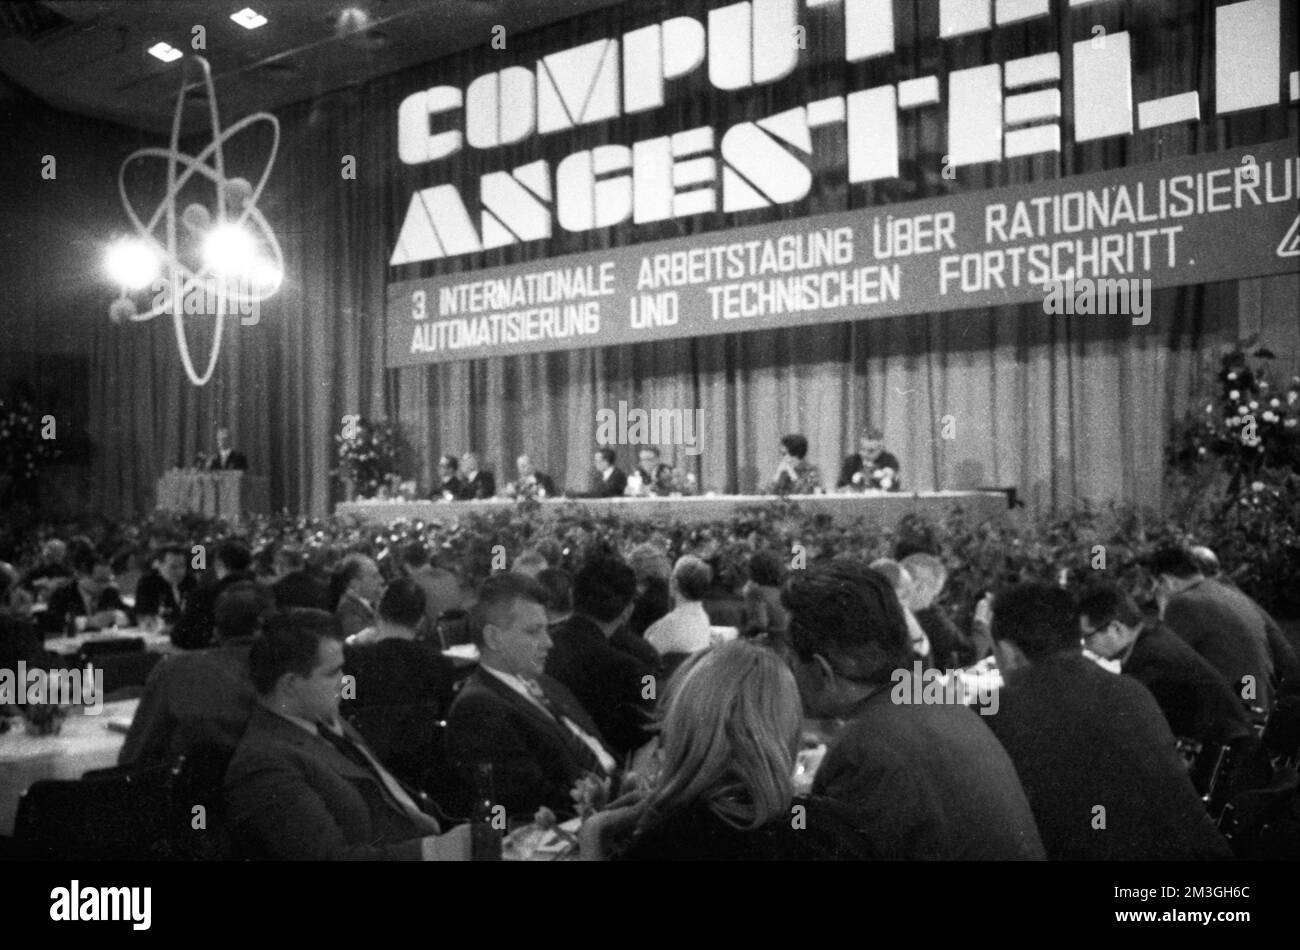 The influence of the computer on society, the world of work and the future was the theme of this international conference organised by IG Metall in Stock Photo